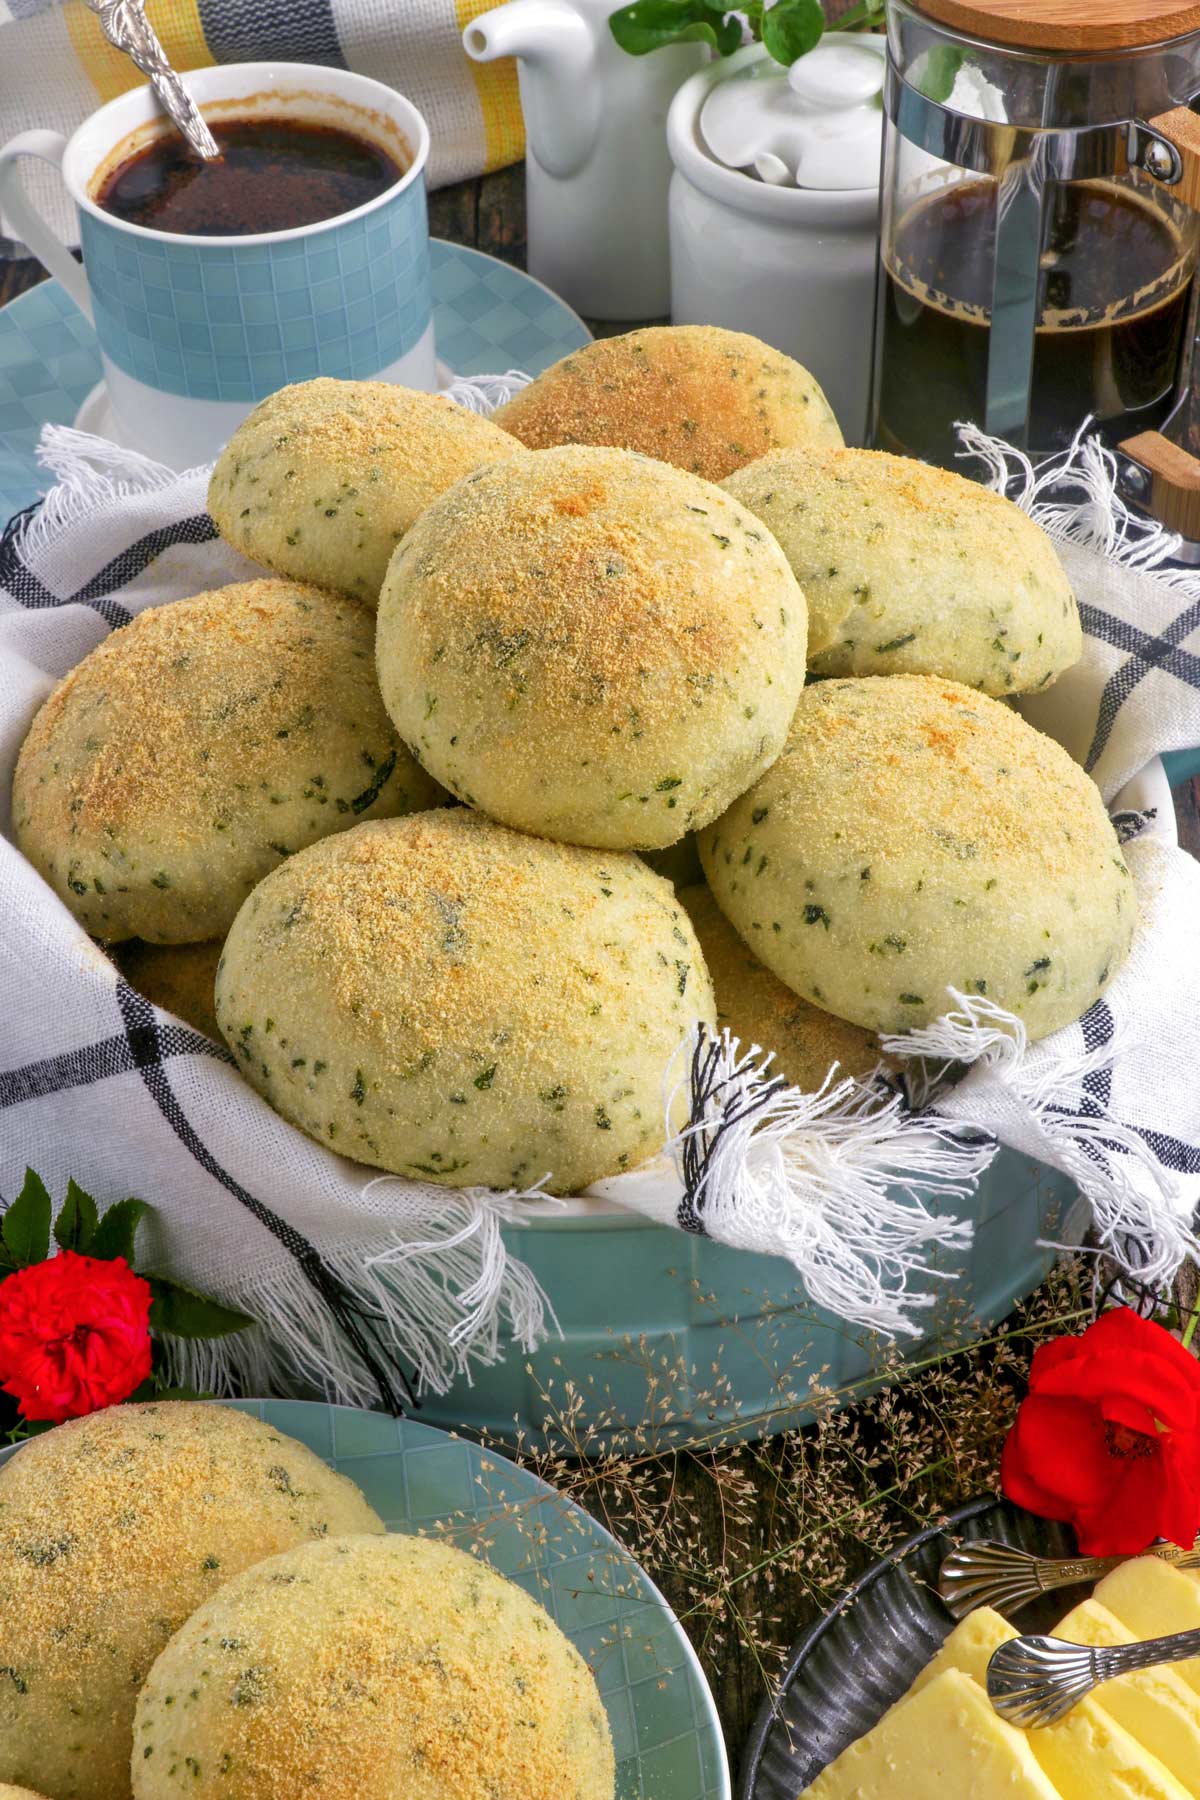 Healthier and yummier Pandesal infused with malunggay leaves.